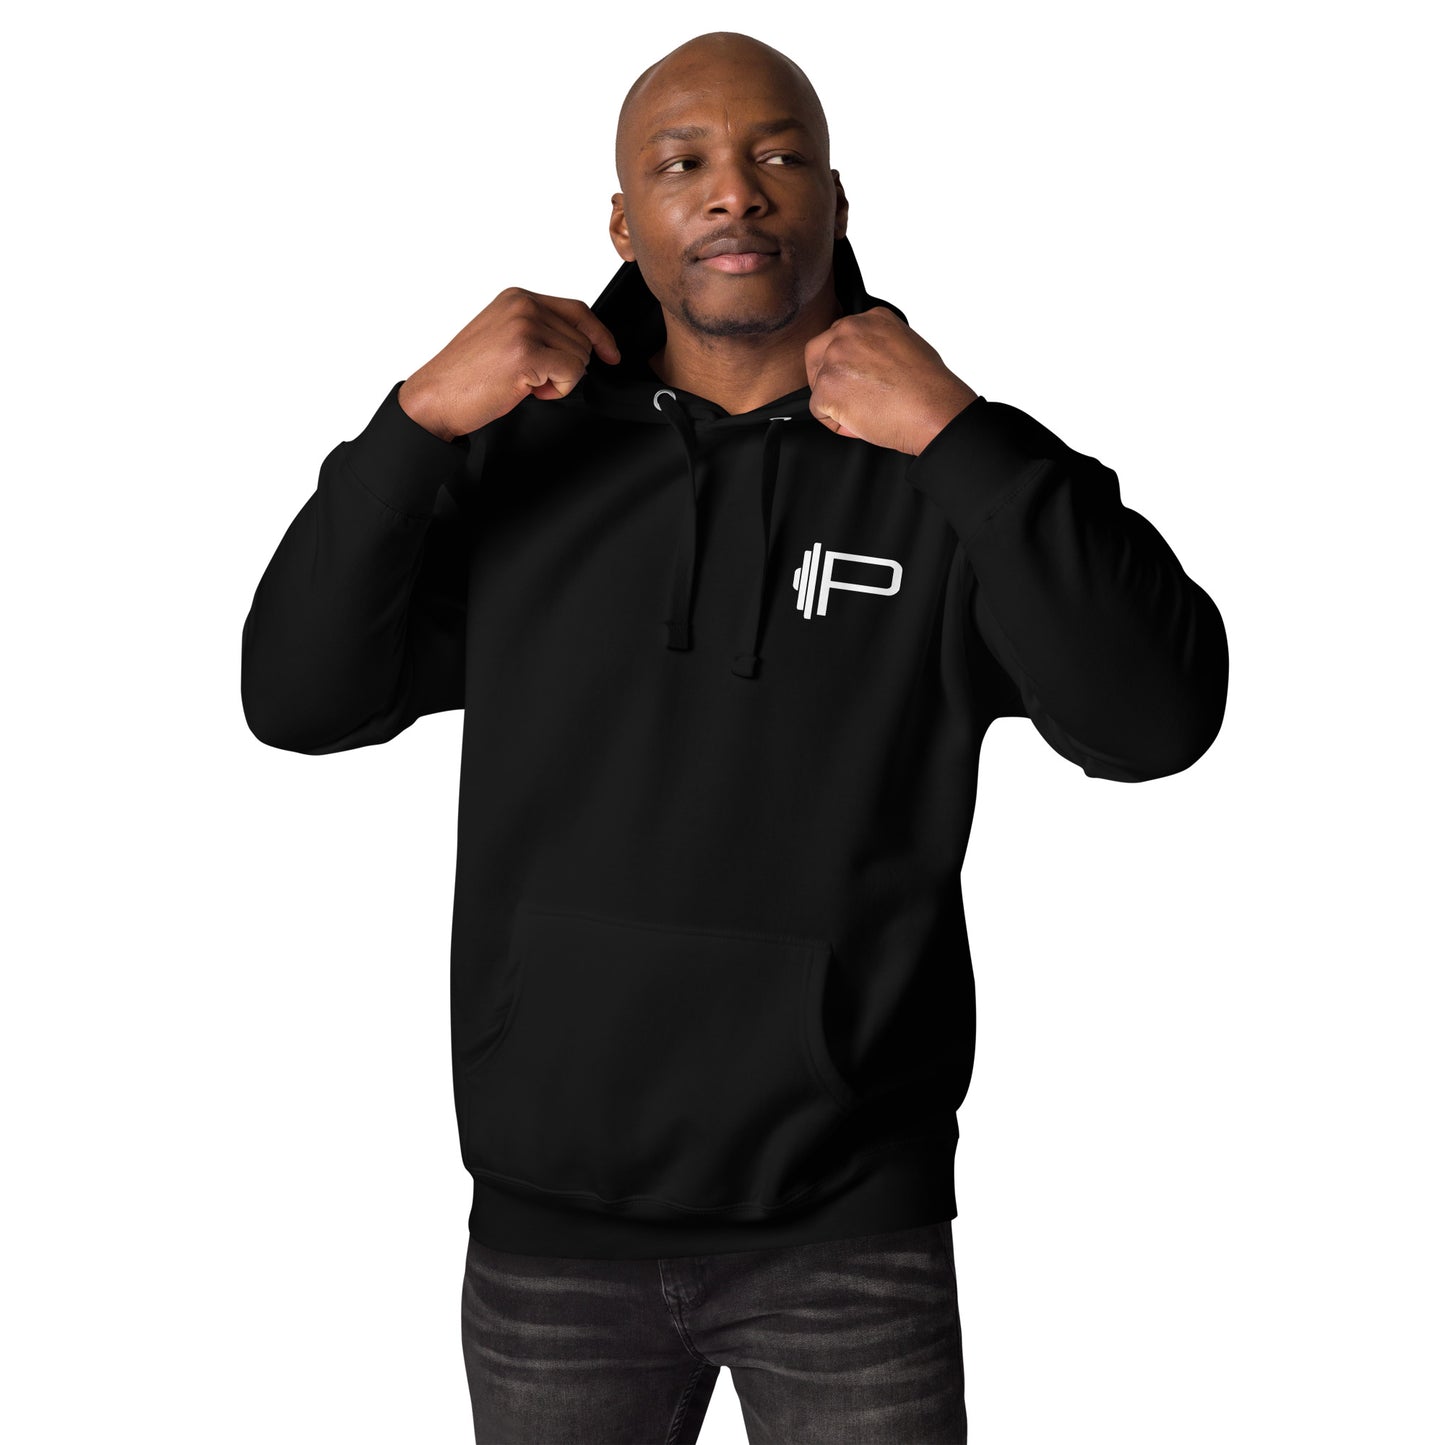 "PURE PHYSIQUE" Unisex Hoodie